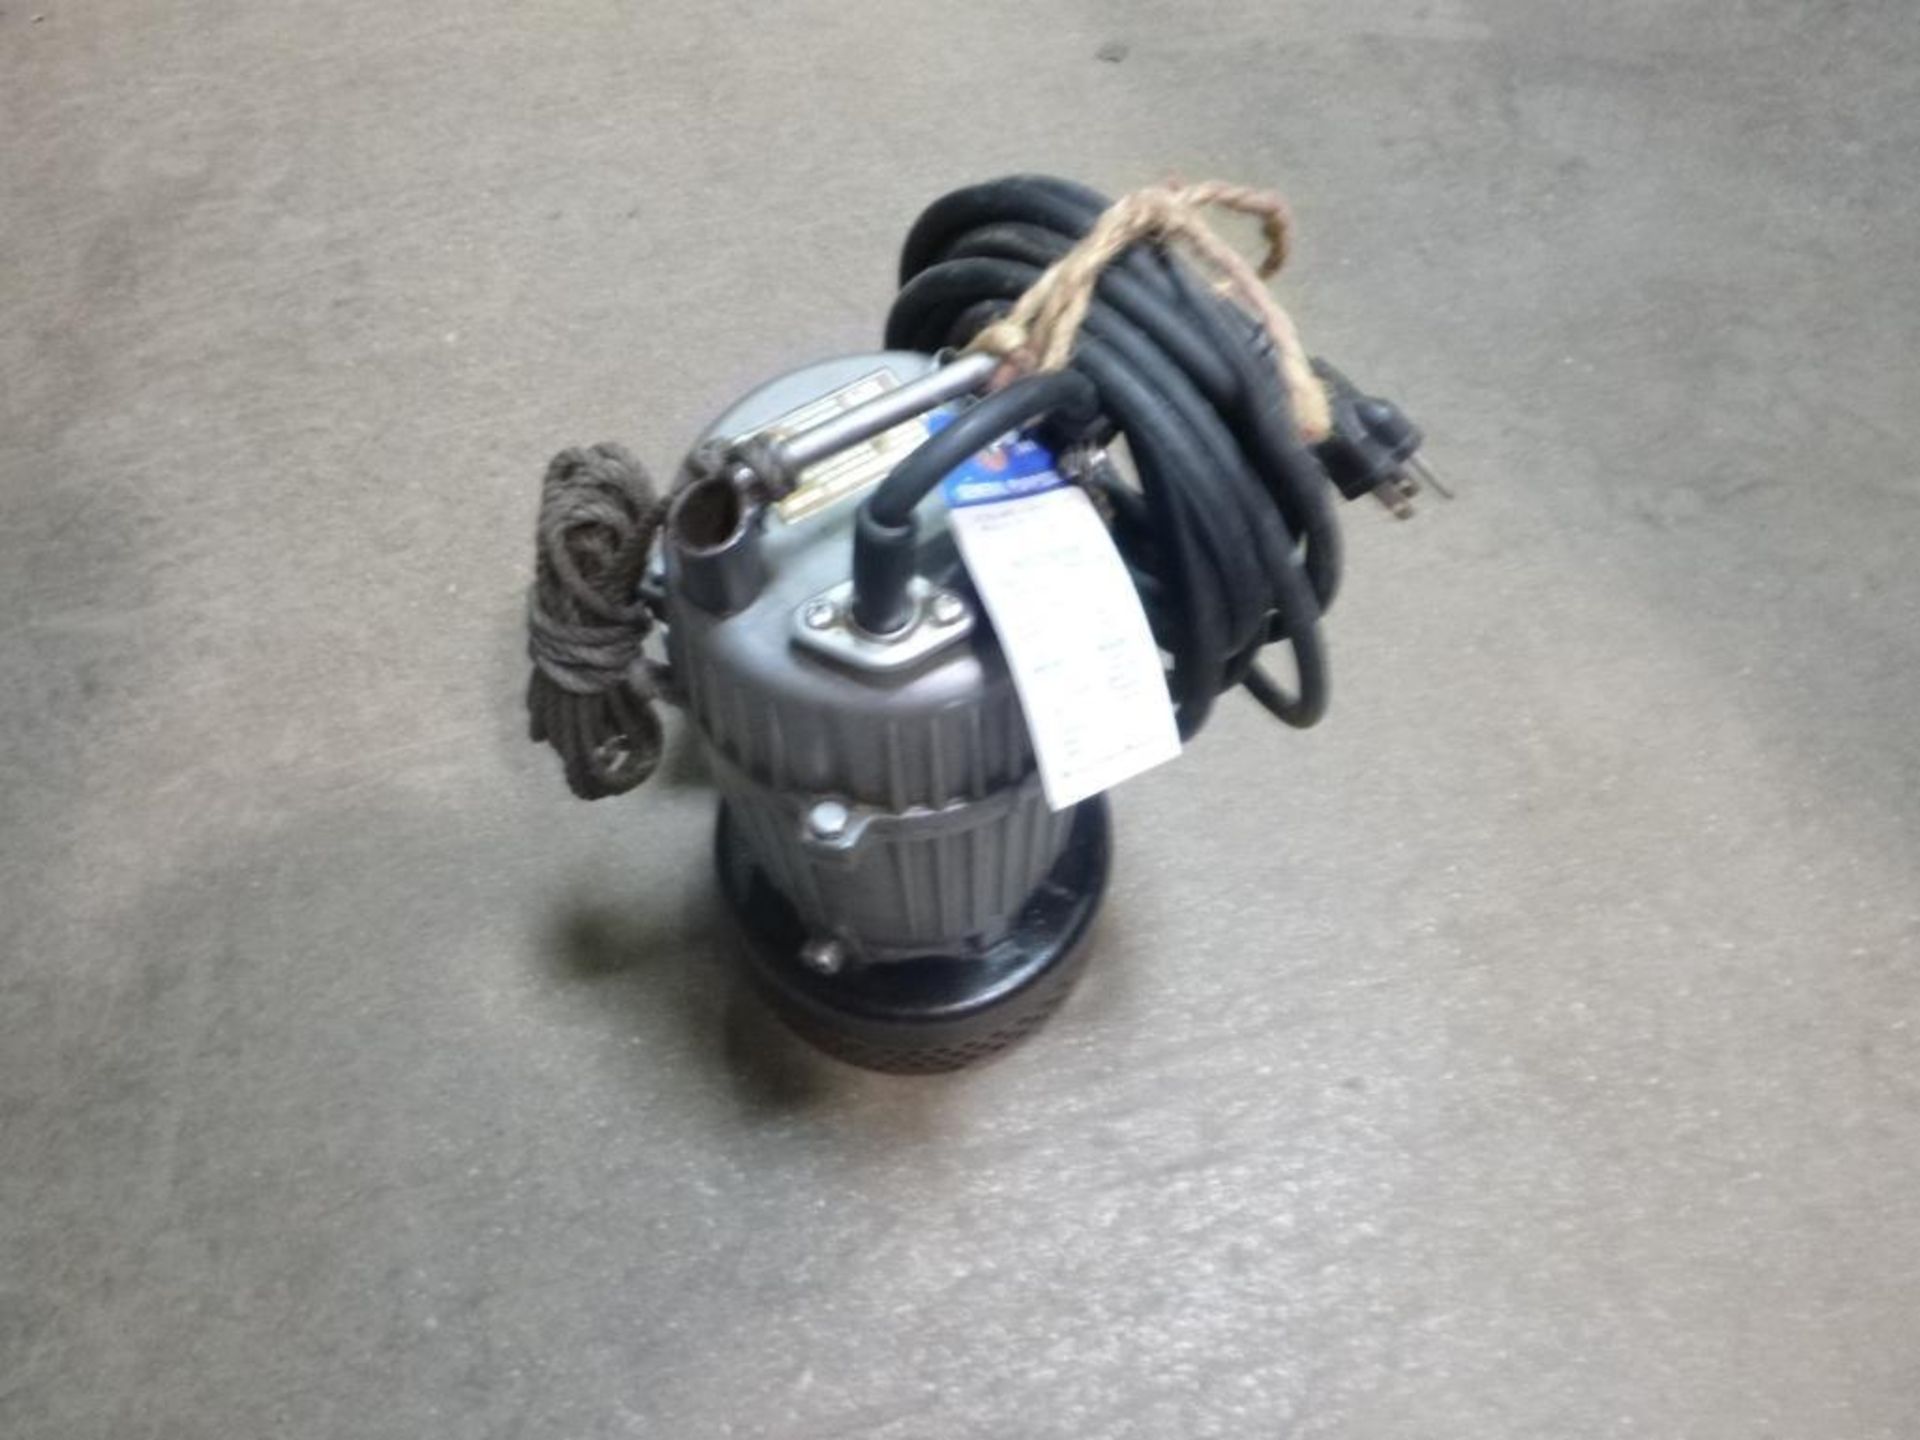 Koshin PX65011 Submersible Pump, 1-1/2 in. - 2 in., , Approx. 7500 GPH - Image 3 of 6